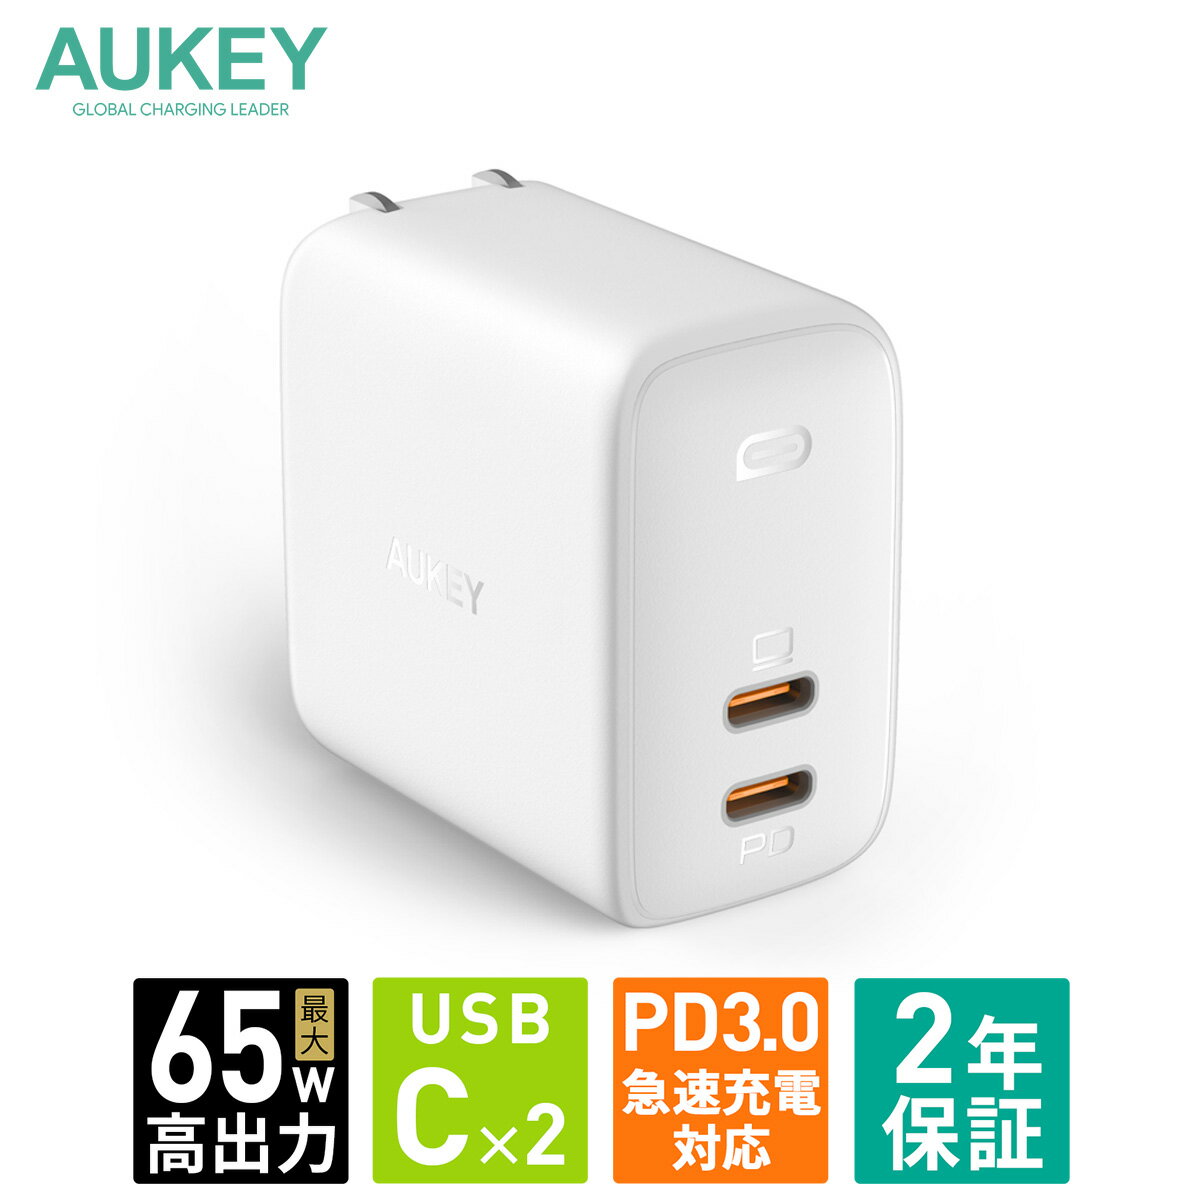 AUKEY PA-B4 X}z m[gp\R [d I[L[ Omnia Duo zCg iPhone  iPhone Android 2|[g